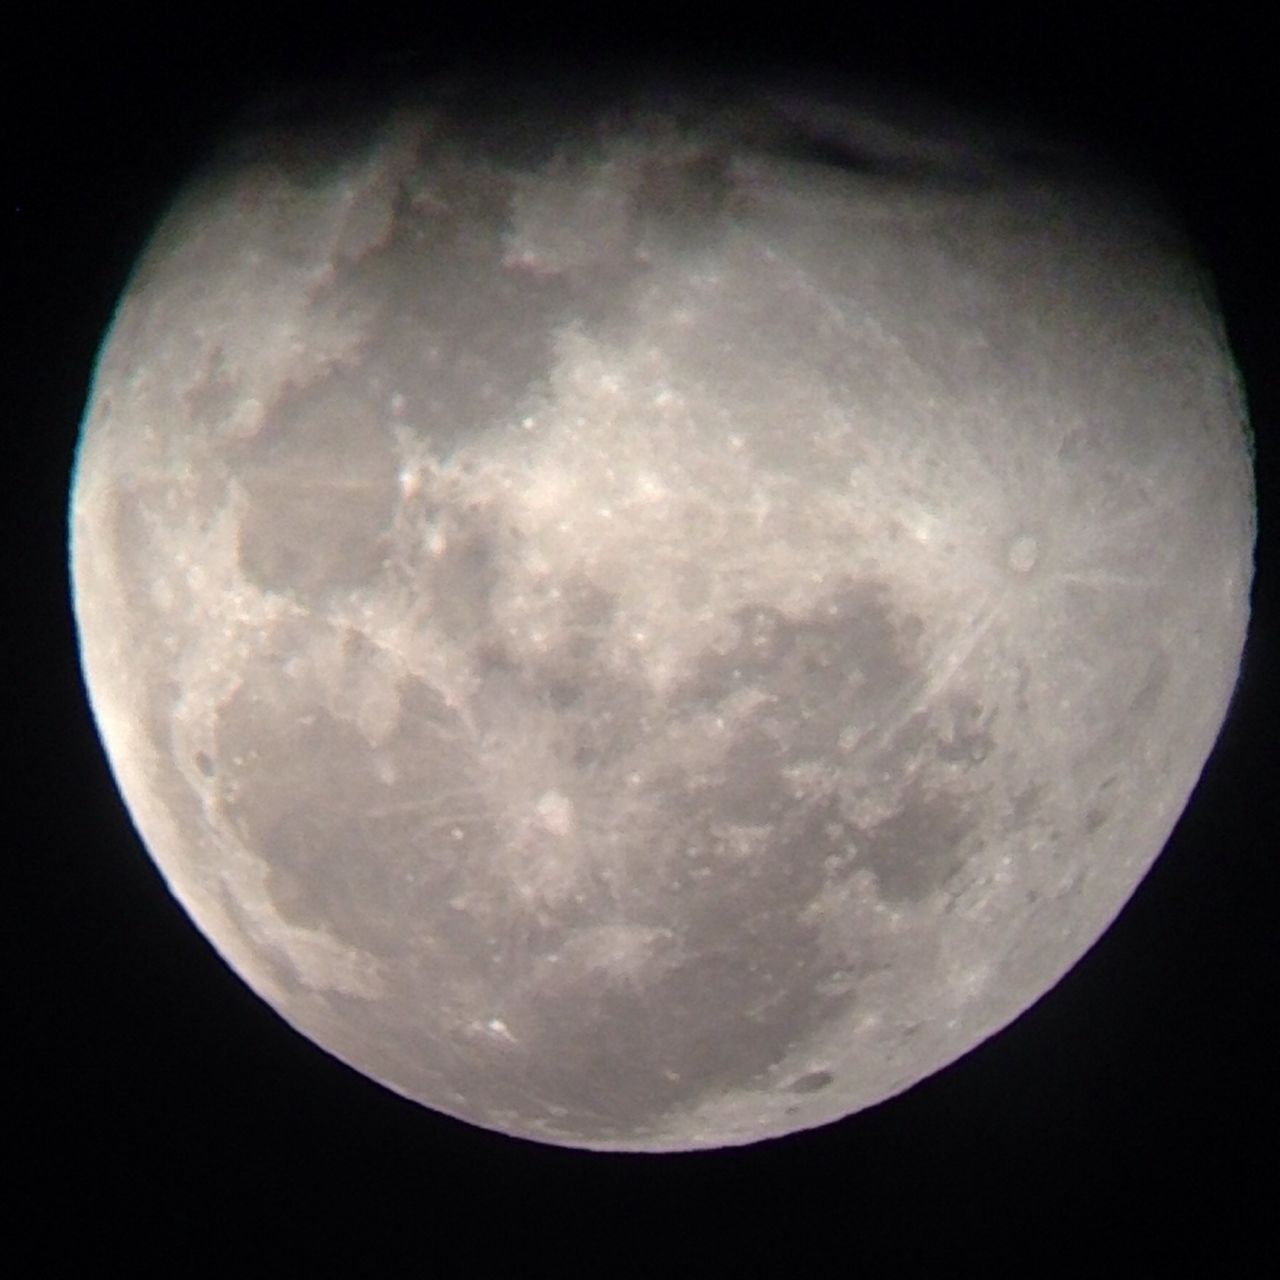 <a href="http://ireport.cnn.com/docs/DOC-1159790">Eric Strauss </a>of Clifton, Virginia, shot this photo through the viewfinder of his neighbor's telescope. "This is the first time I had ever tried that, and it worked out better than I would have ever imagined," he said. "The hardest part was to focus and frame the moon in the viewfinder correctly. The shadow on the top of the picture is not the moon's shadow, but instead from the way I framed the image within the viewfinder."